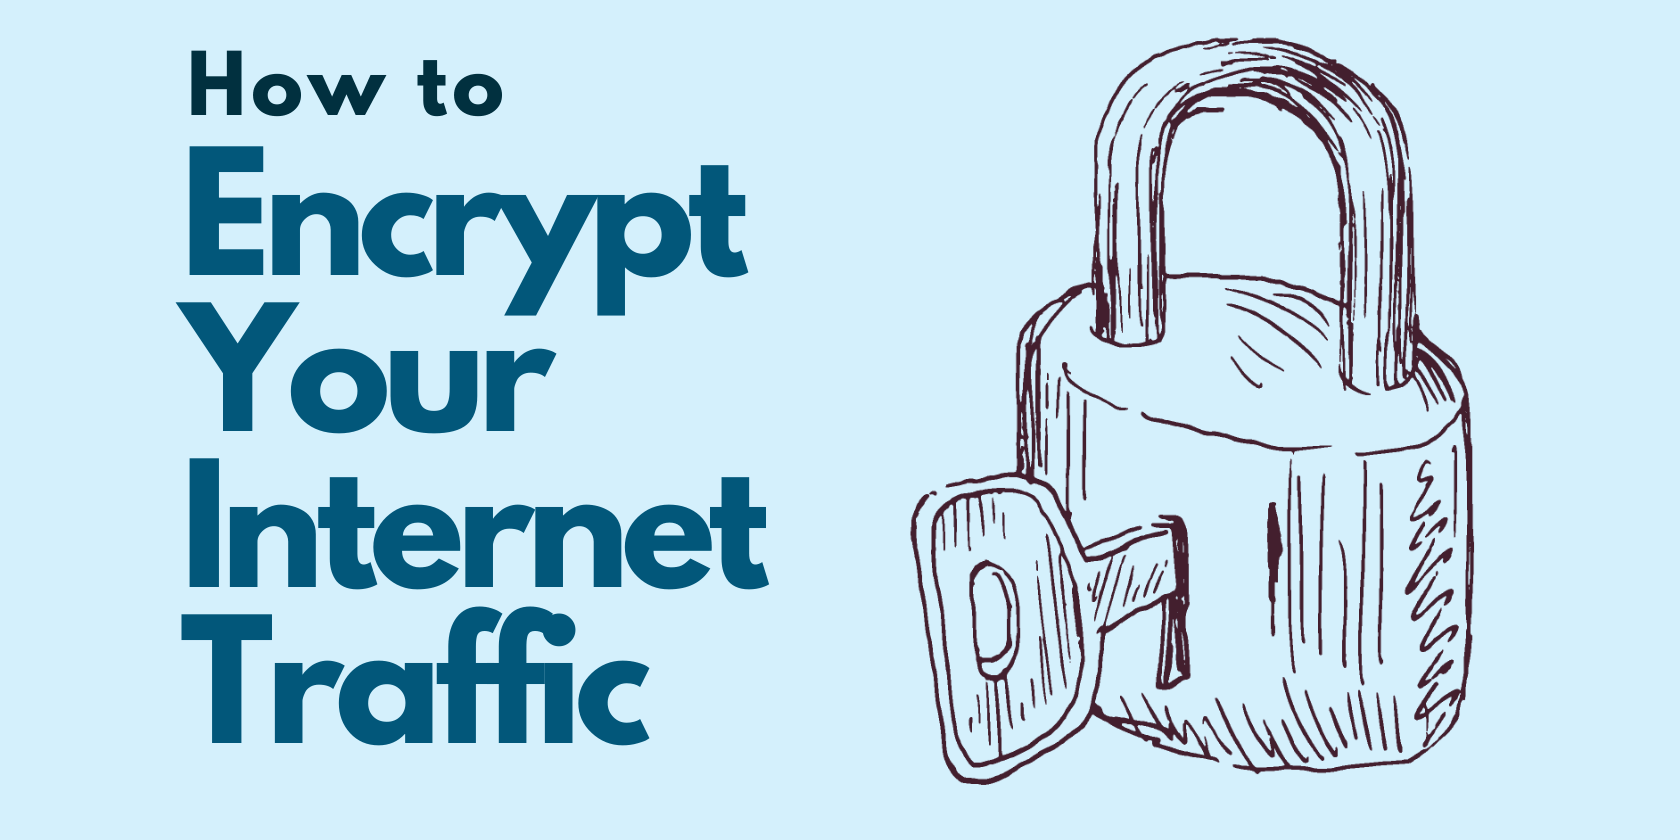 How to Encrypt Your Internet Traffic